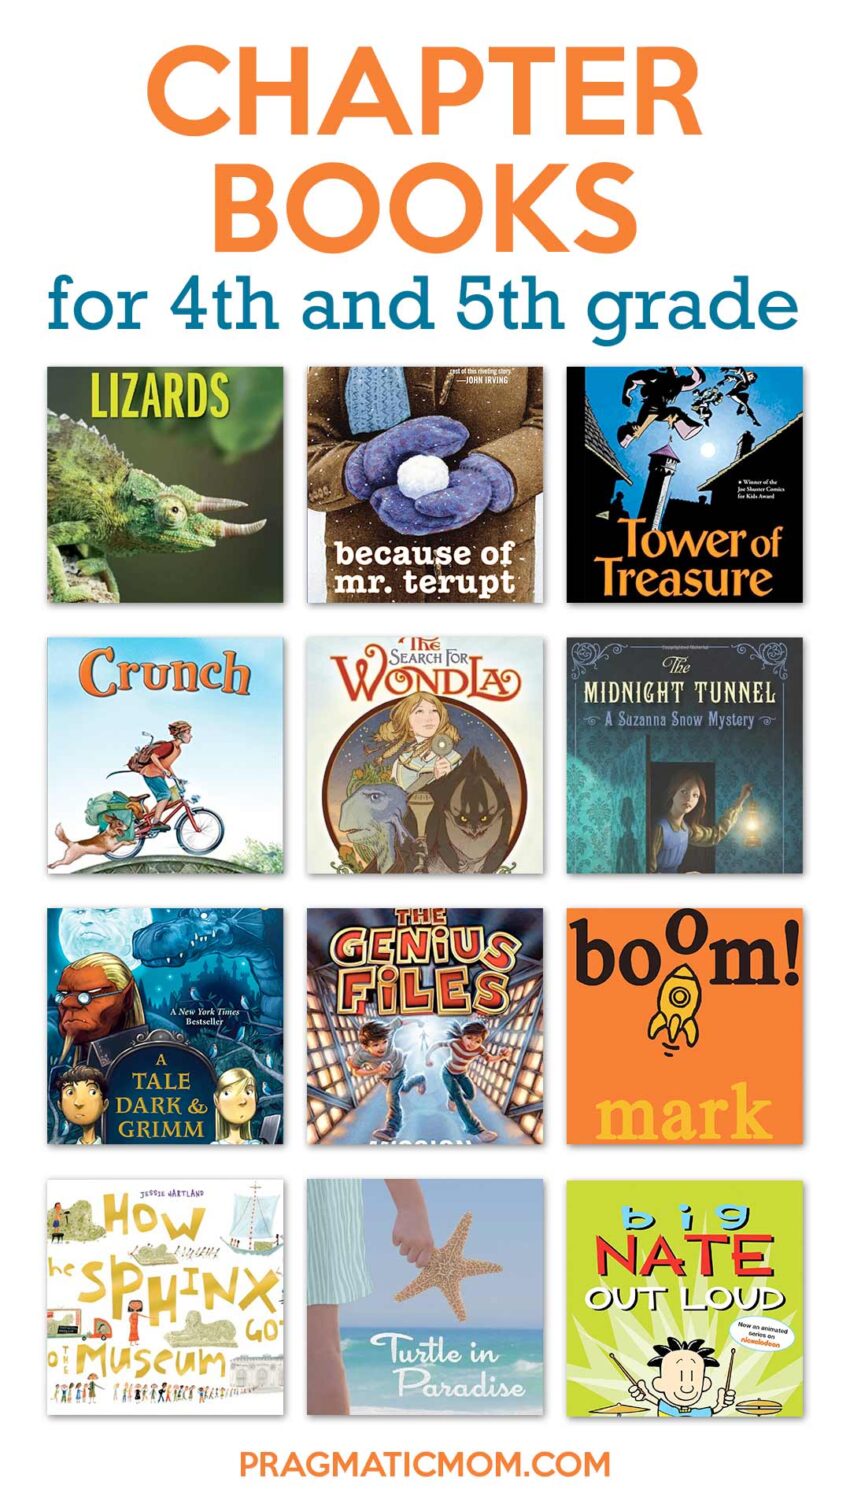 Chapter Books for 4th and 5th Grade